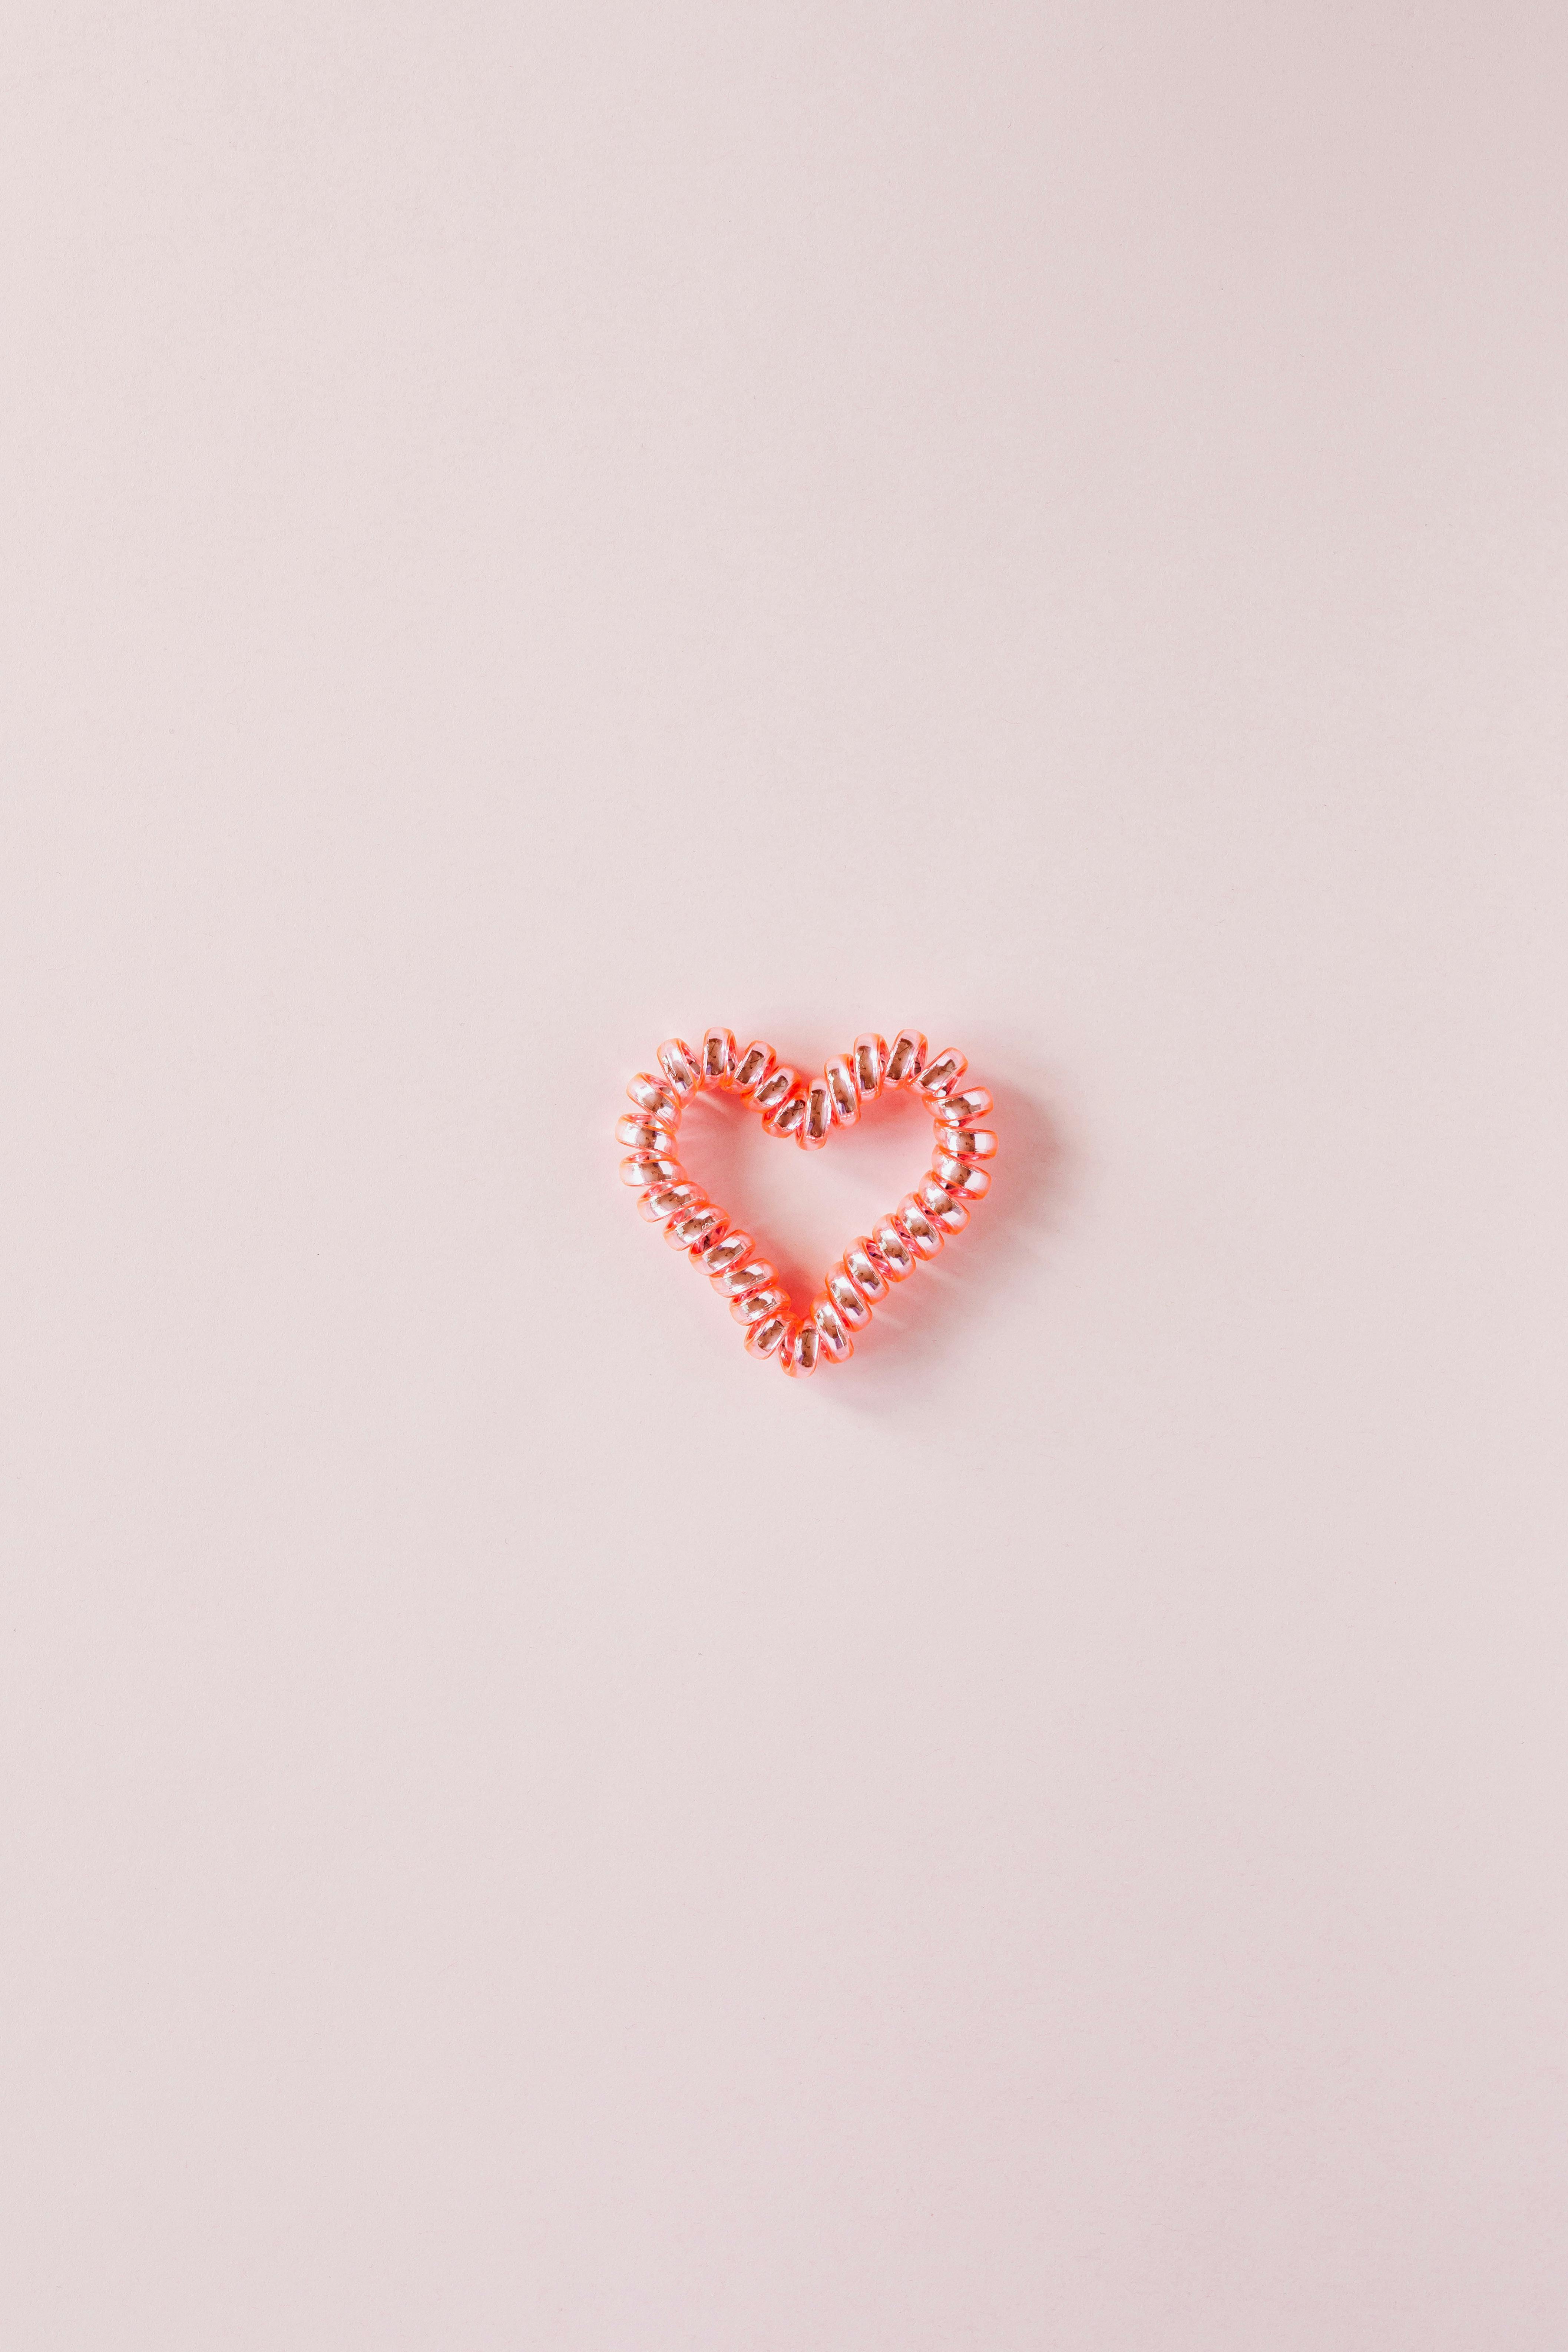 Small decorative heart on smooth pink surface · Free Stock Photo